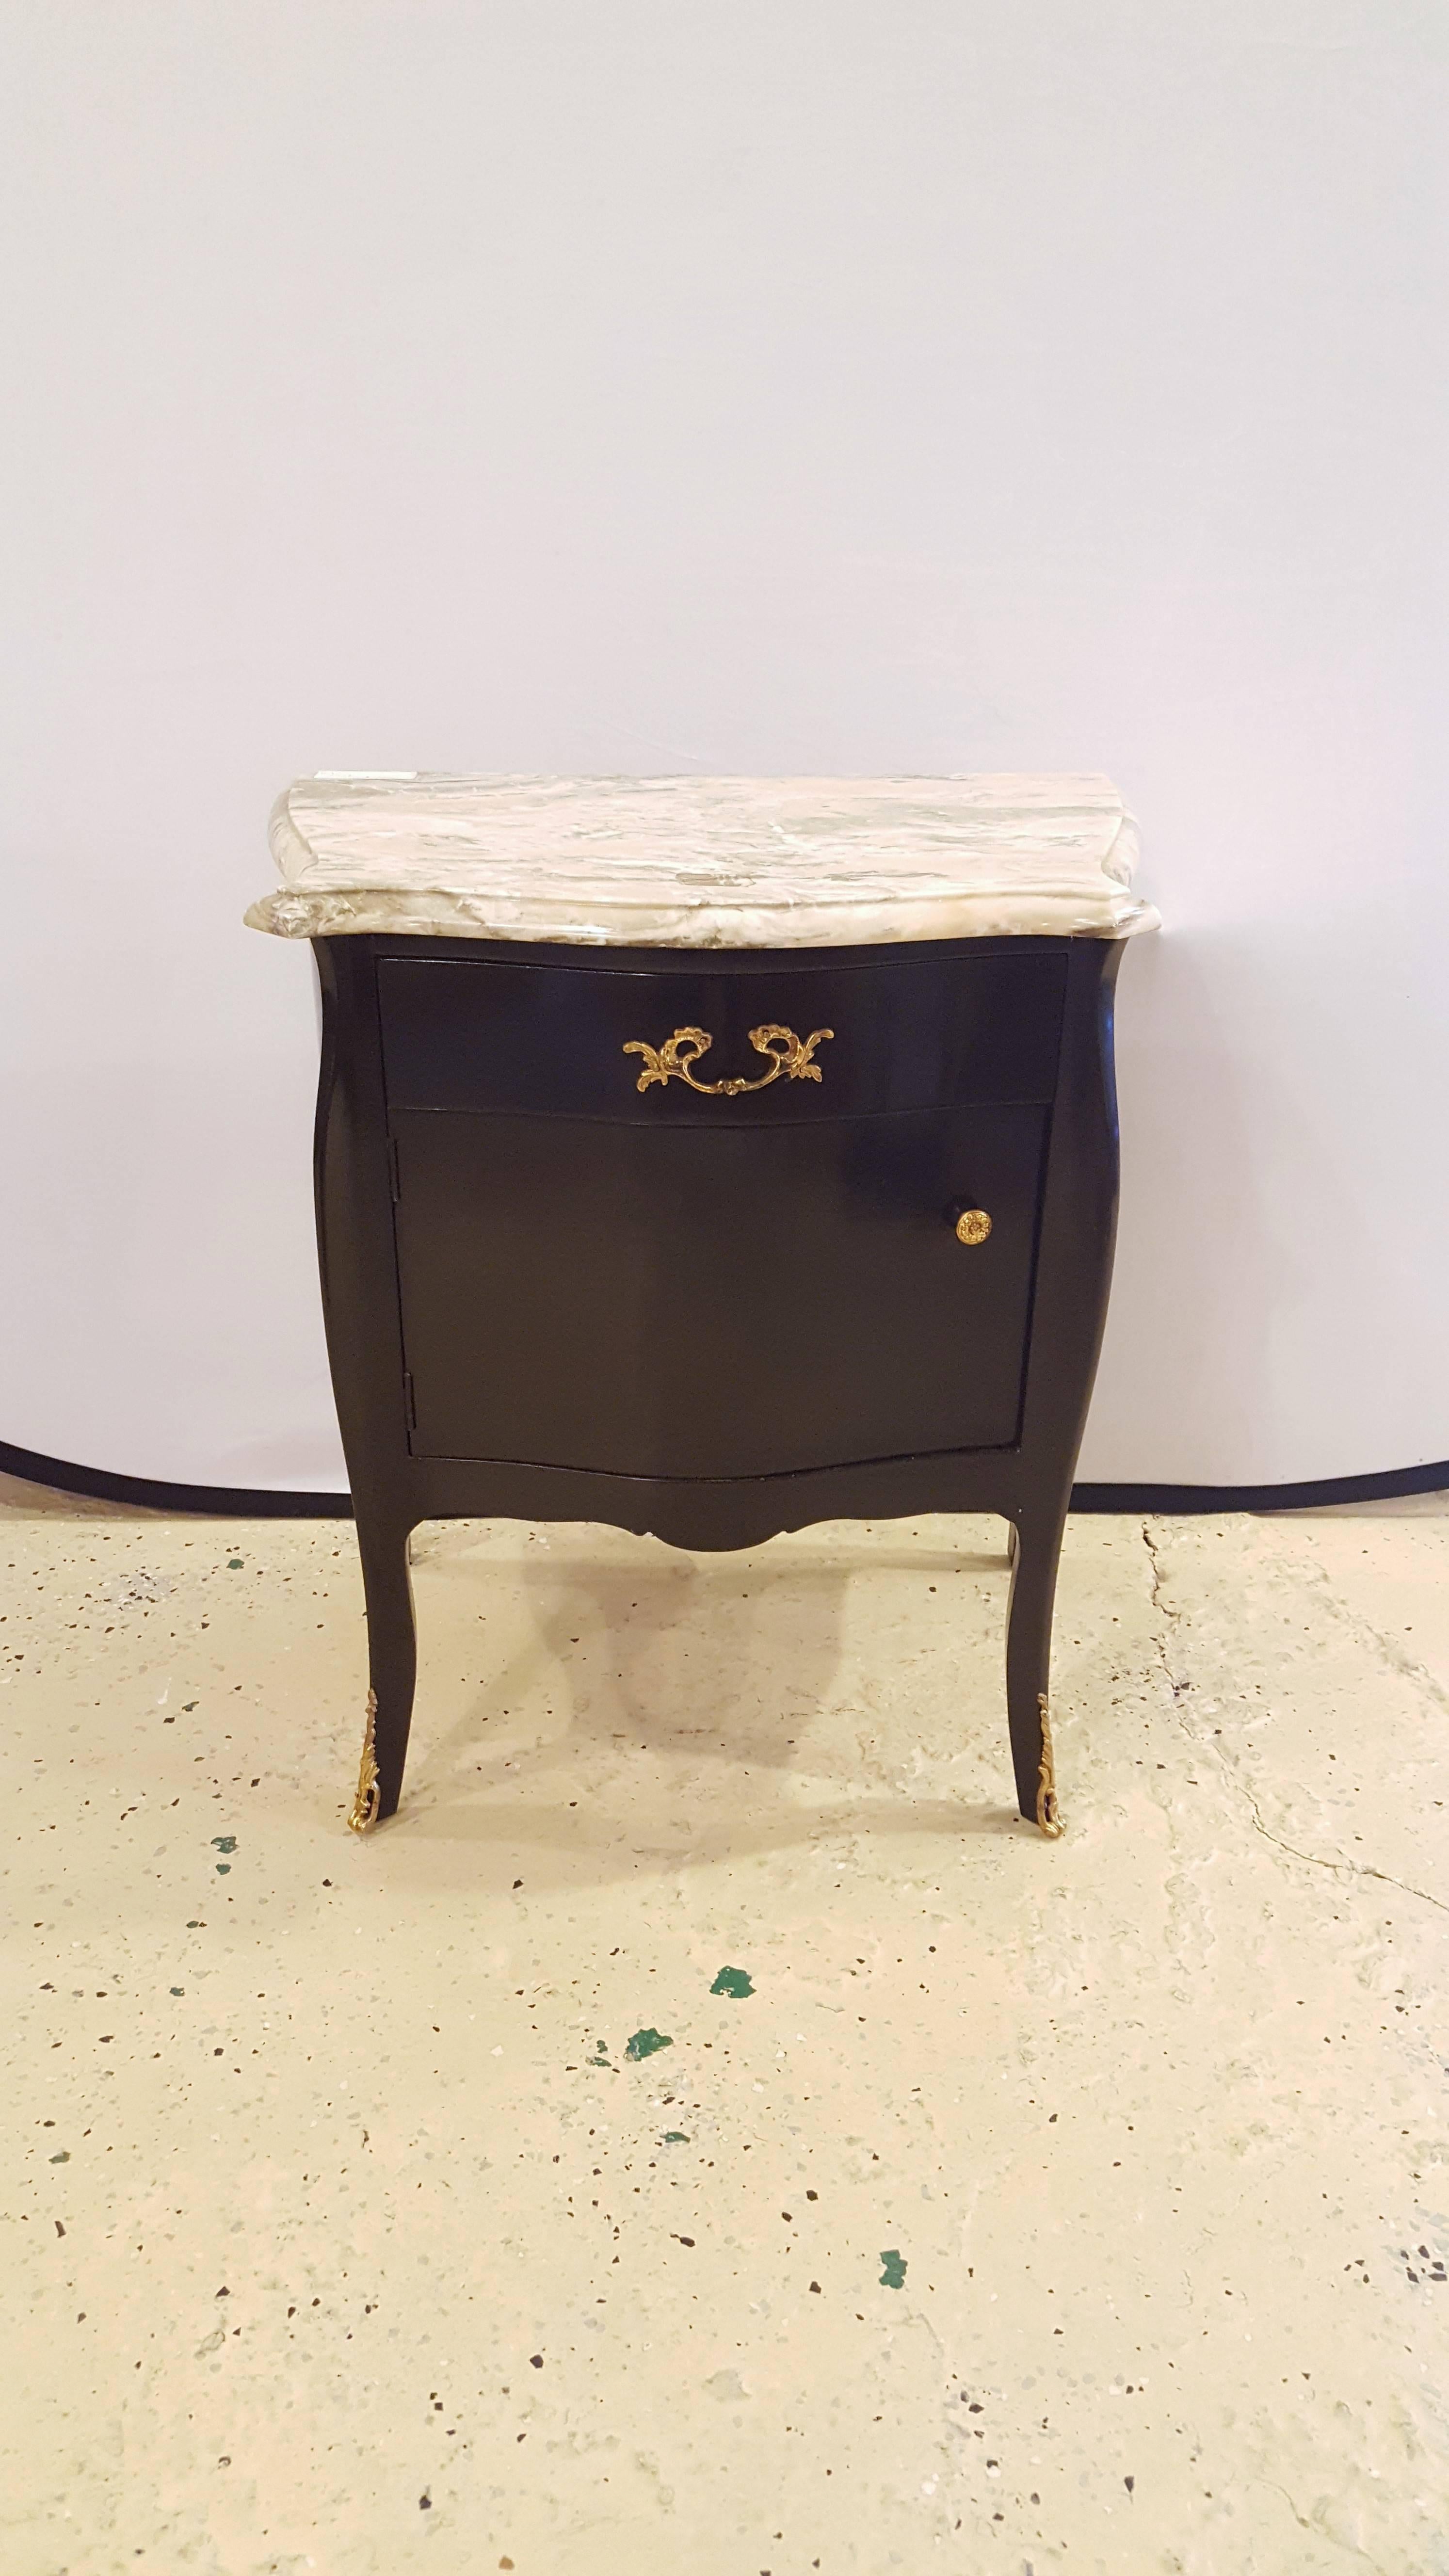 An elegant, sleek, pair of ebonized marble-top nightstands. Each piece has a single drawer, with a single cabinet below, they also have marble top and bronze mounts. The pair can be used as nightstands or side tables, would look beautiful in any